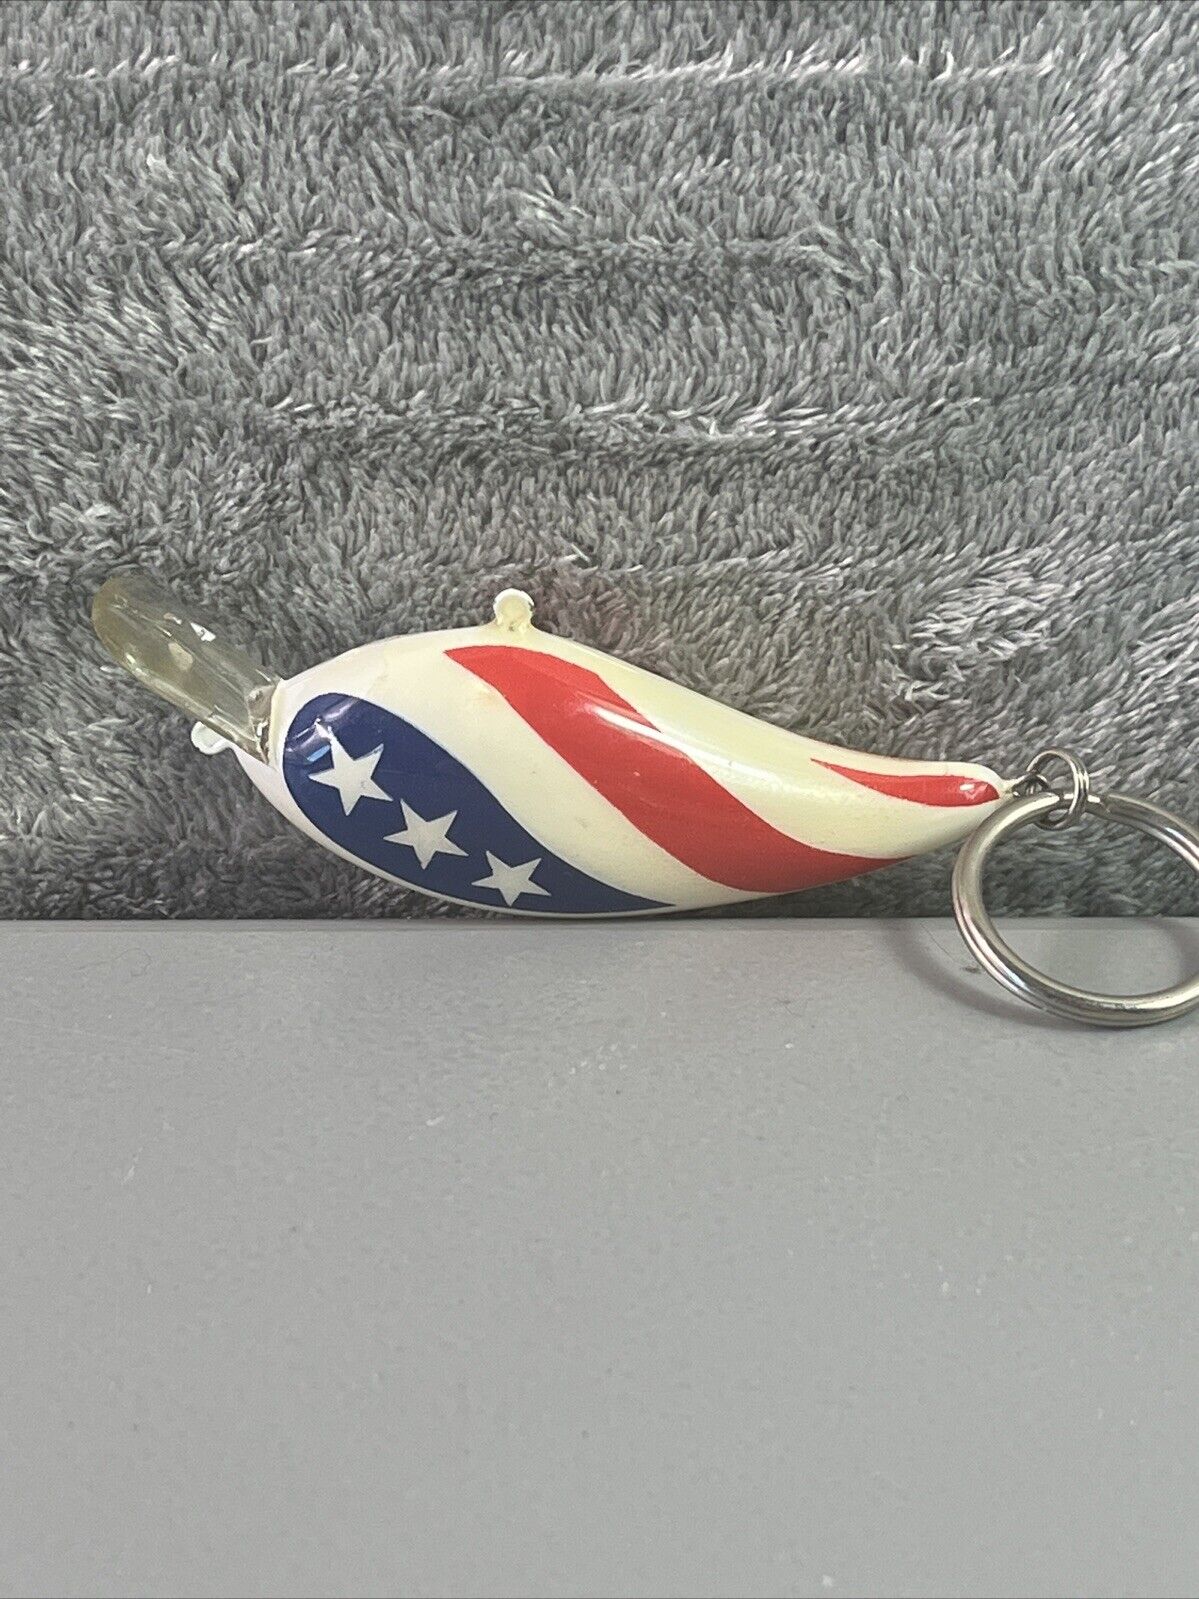 Vintage Keychain Fish Fishing Lure American Flag Red white and Blue Patriotic